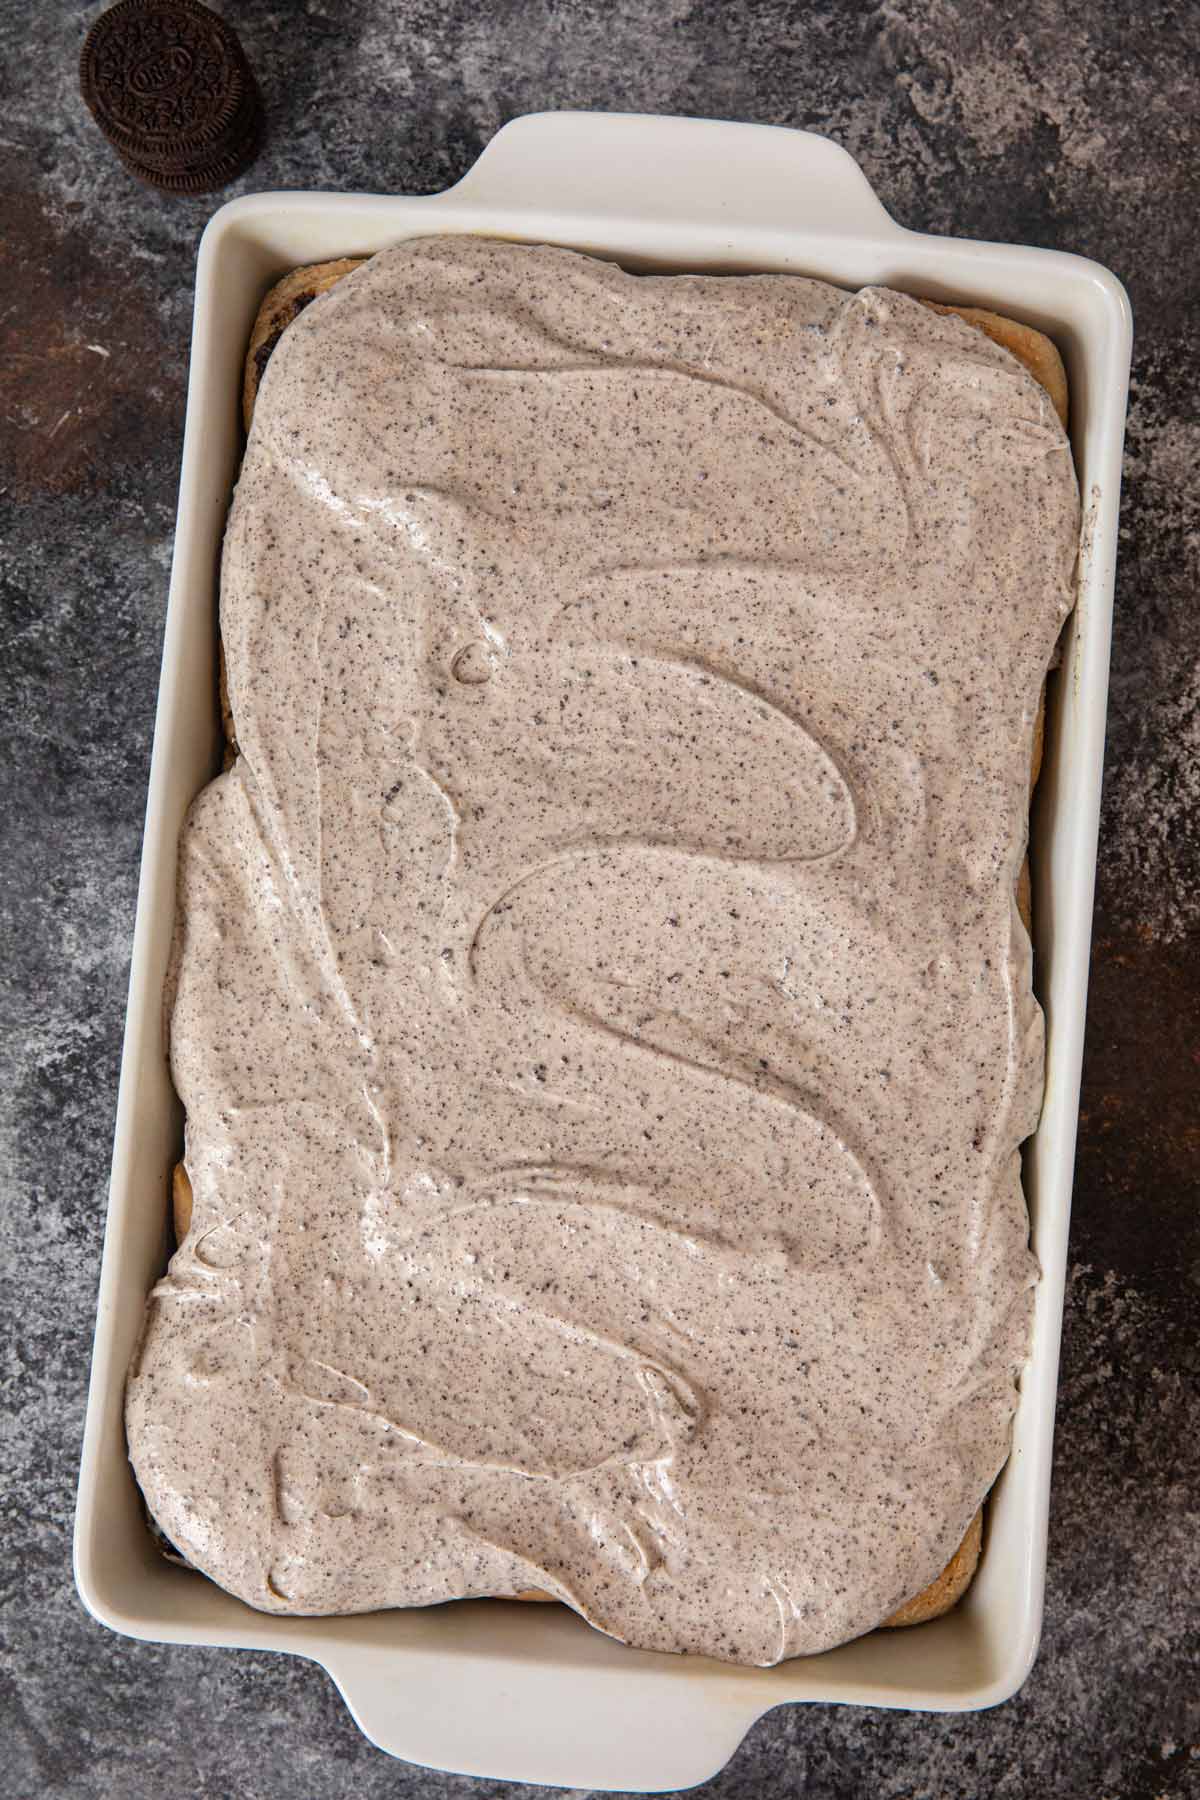 Oreo Cinnamon Rolls in baking dish with Oreo frosting